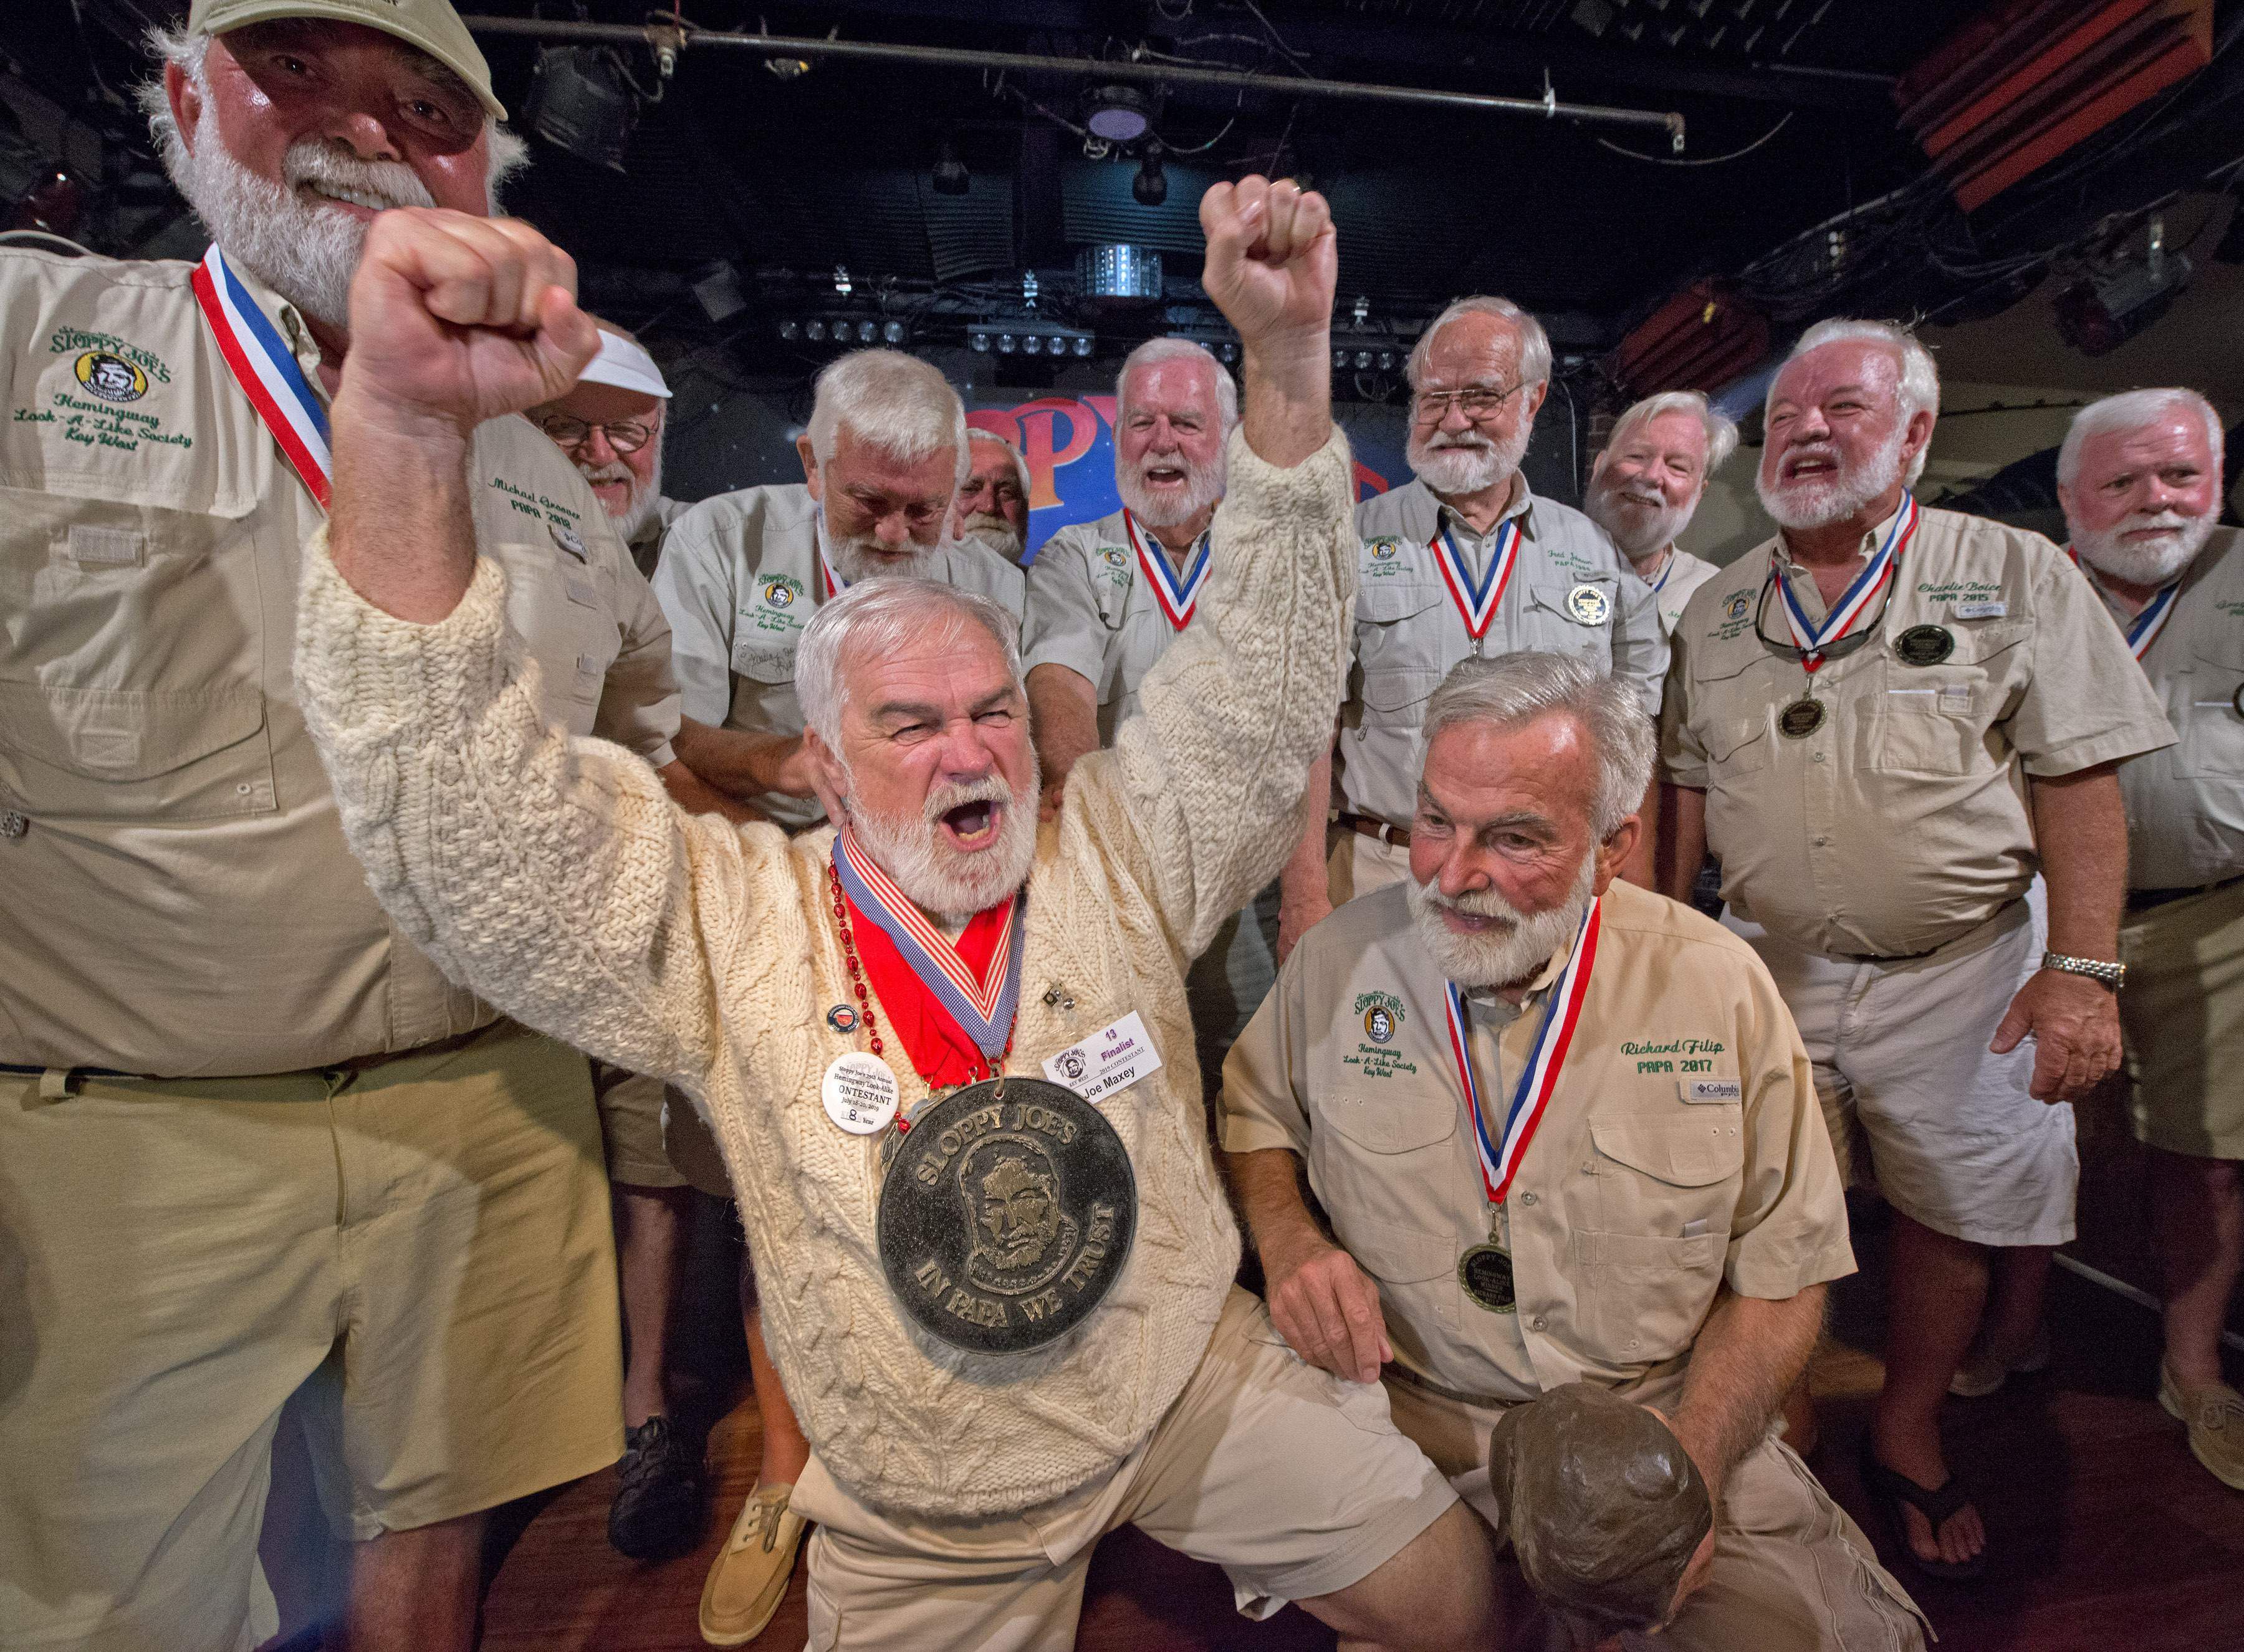 Hemingway look-alike wins Florida contest after 11 attempts